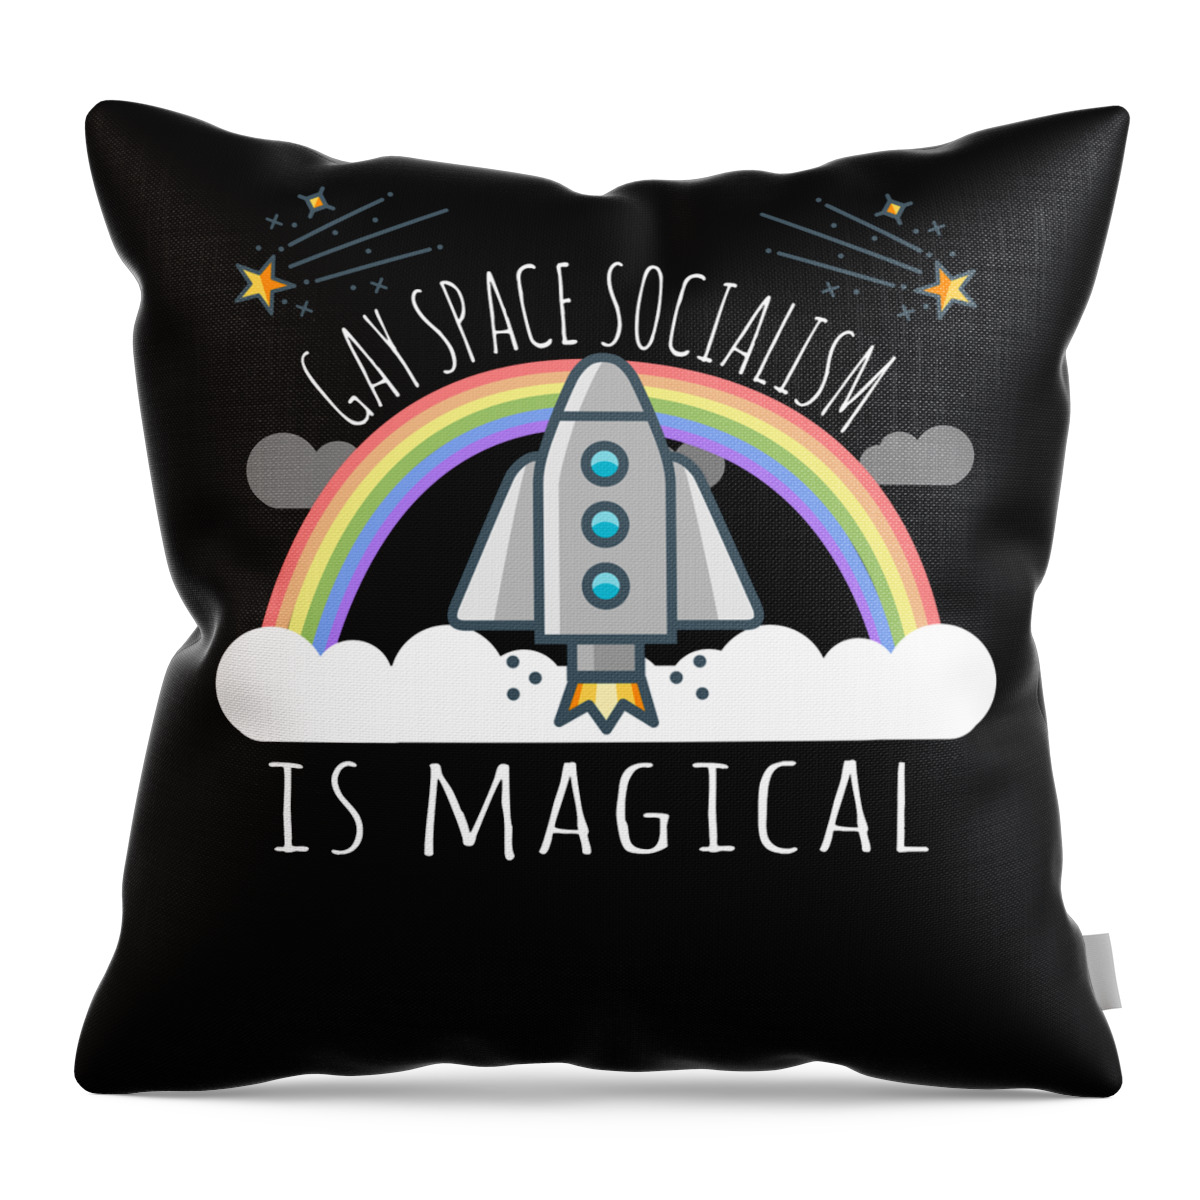 Funny Throw Pillow featuring the digital art Gay Space Socialism Is Magical by Flippin Sweet Gear